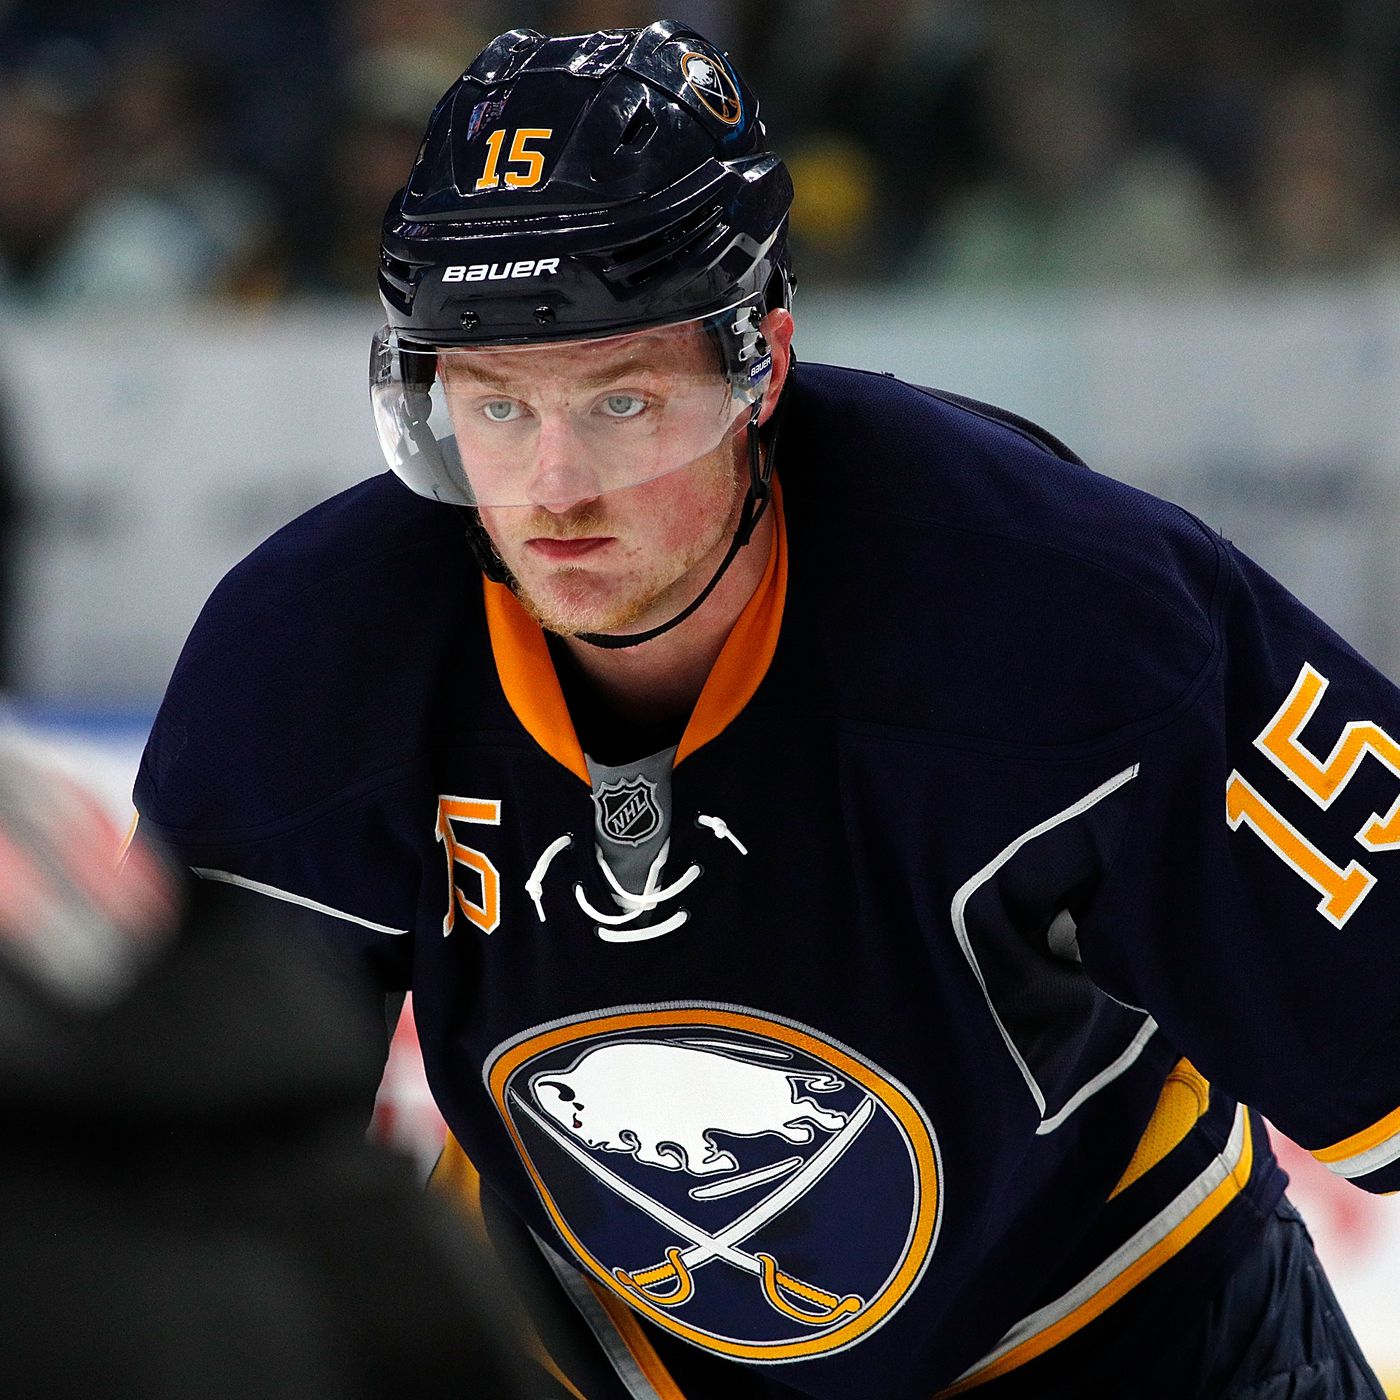 Jack Eichel Health News: What Happened To Him? Know More About His Health Condition And Net Worth